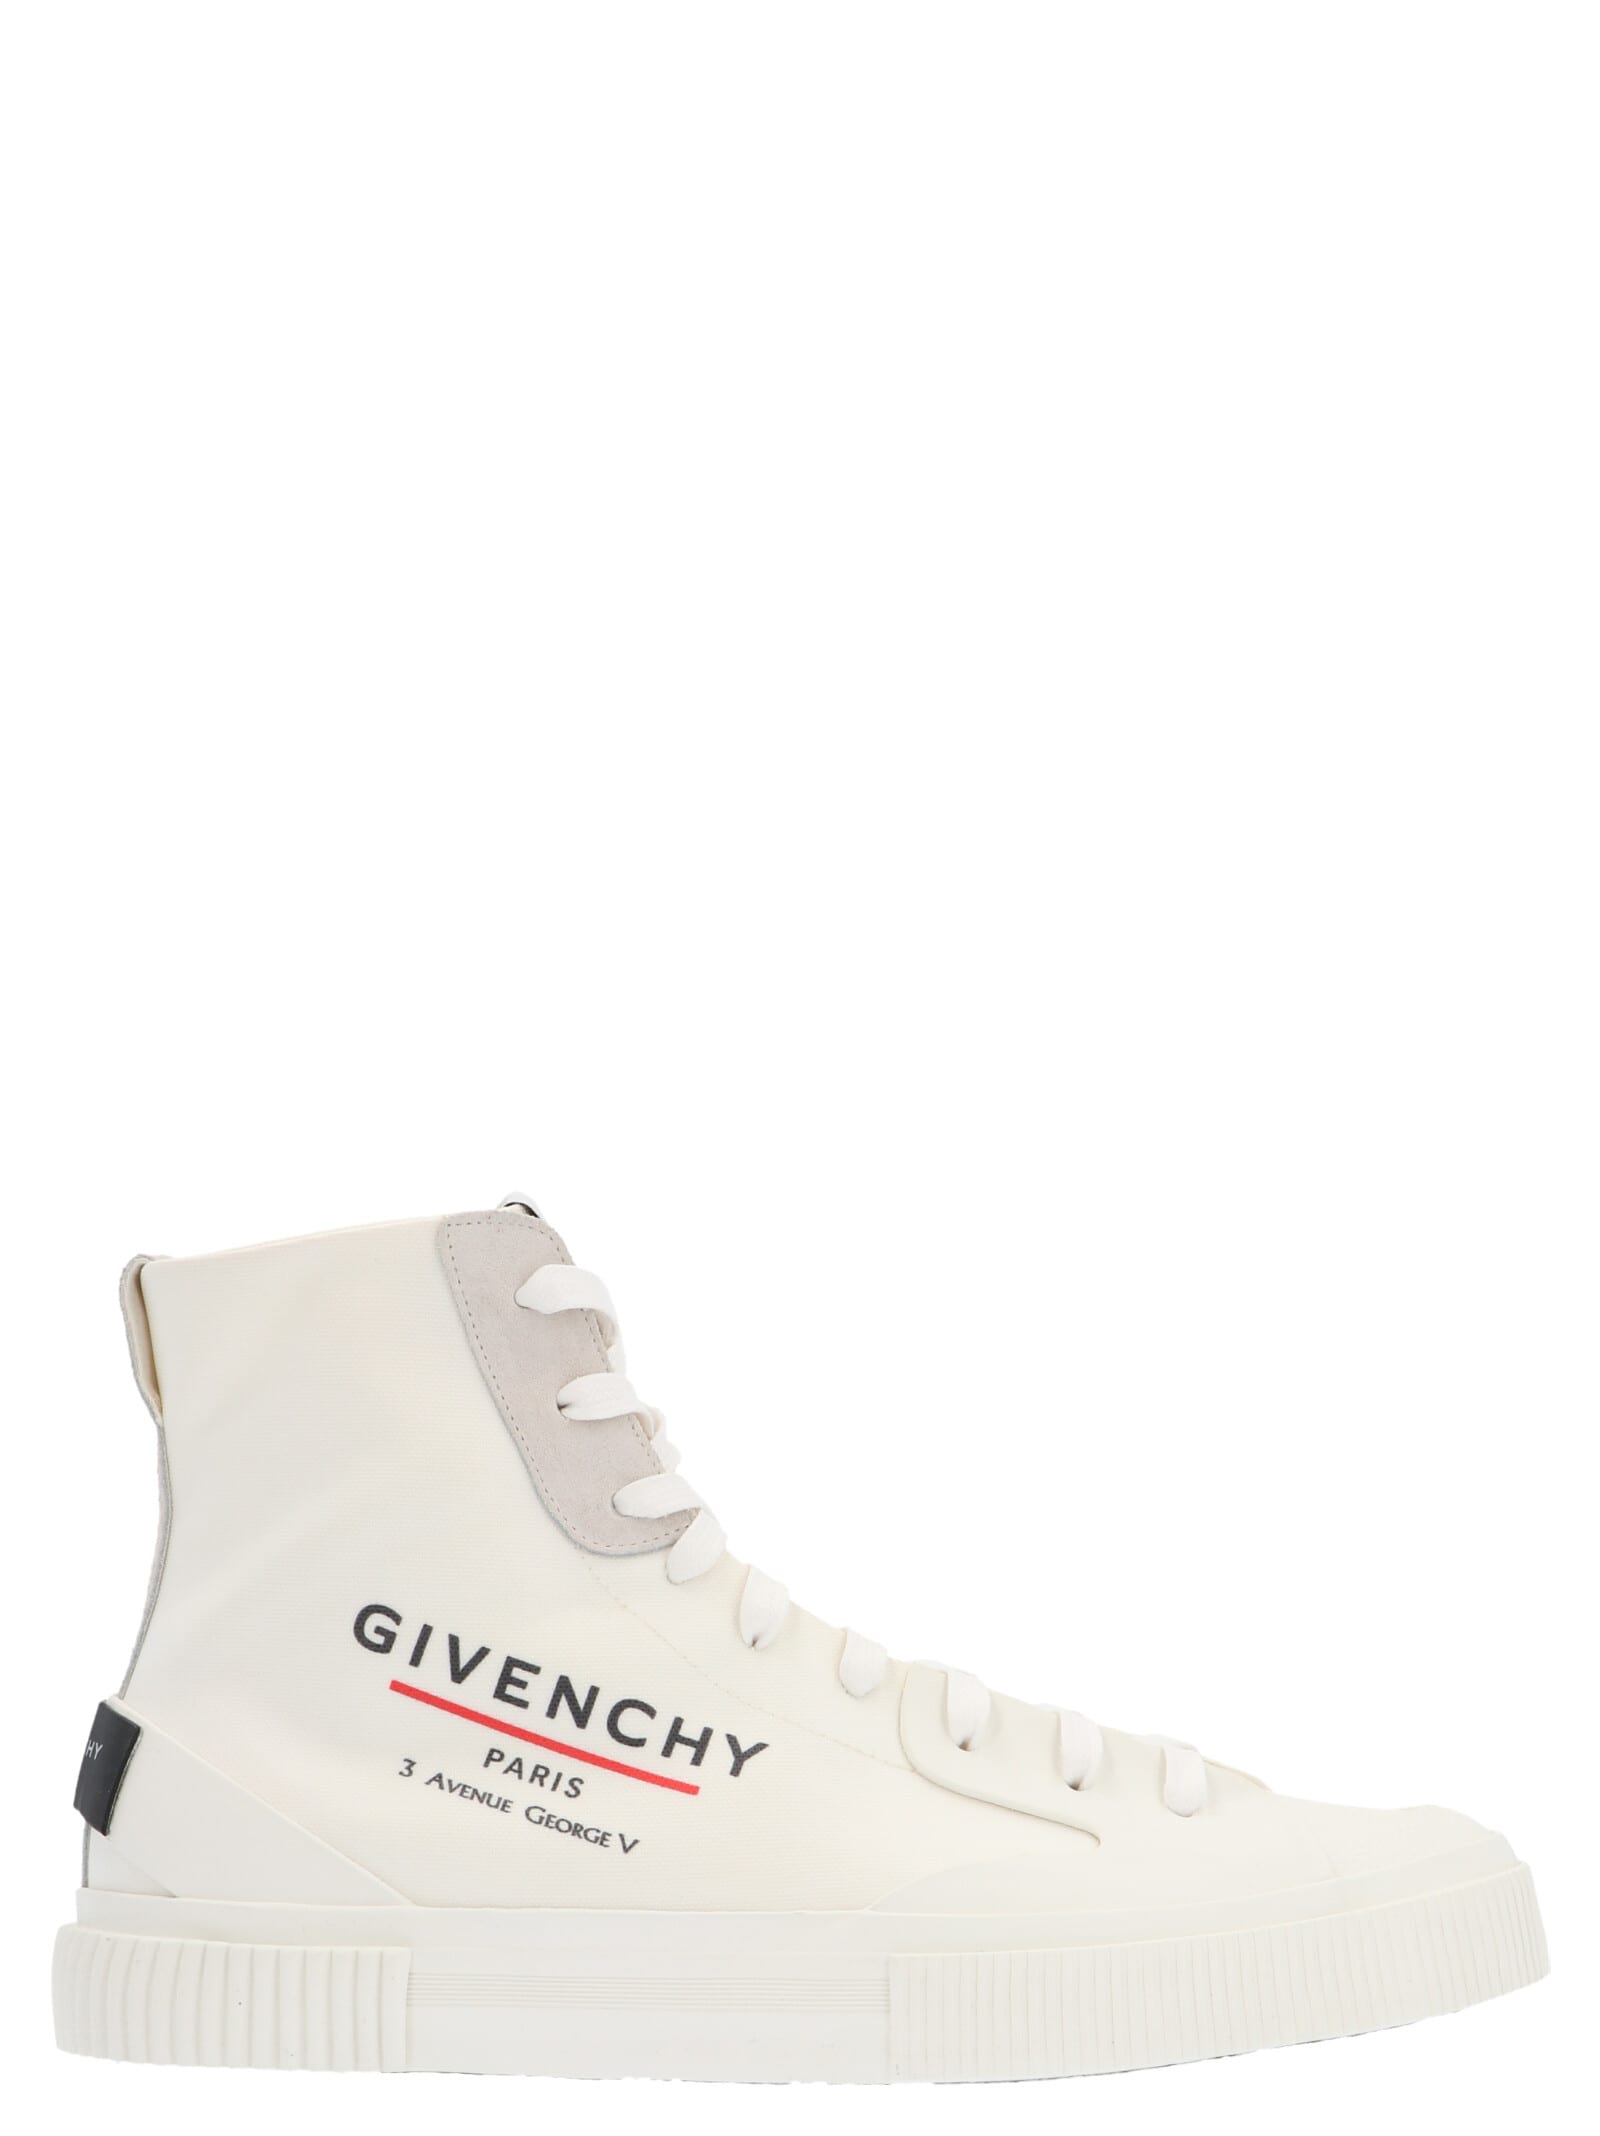 GIVENCHY TENNIS LIGHT SHOES,11266511